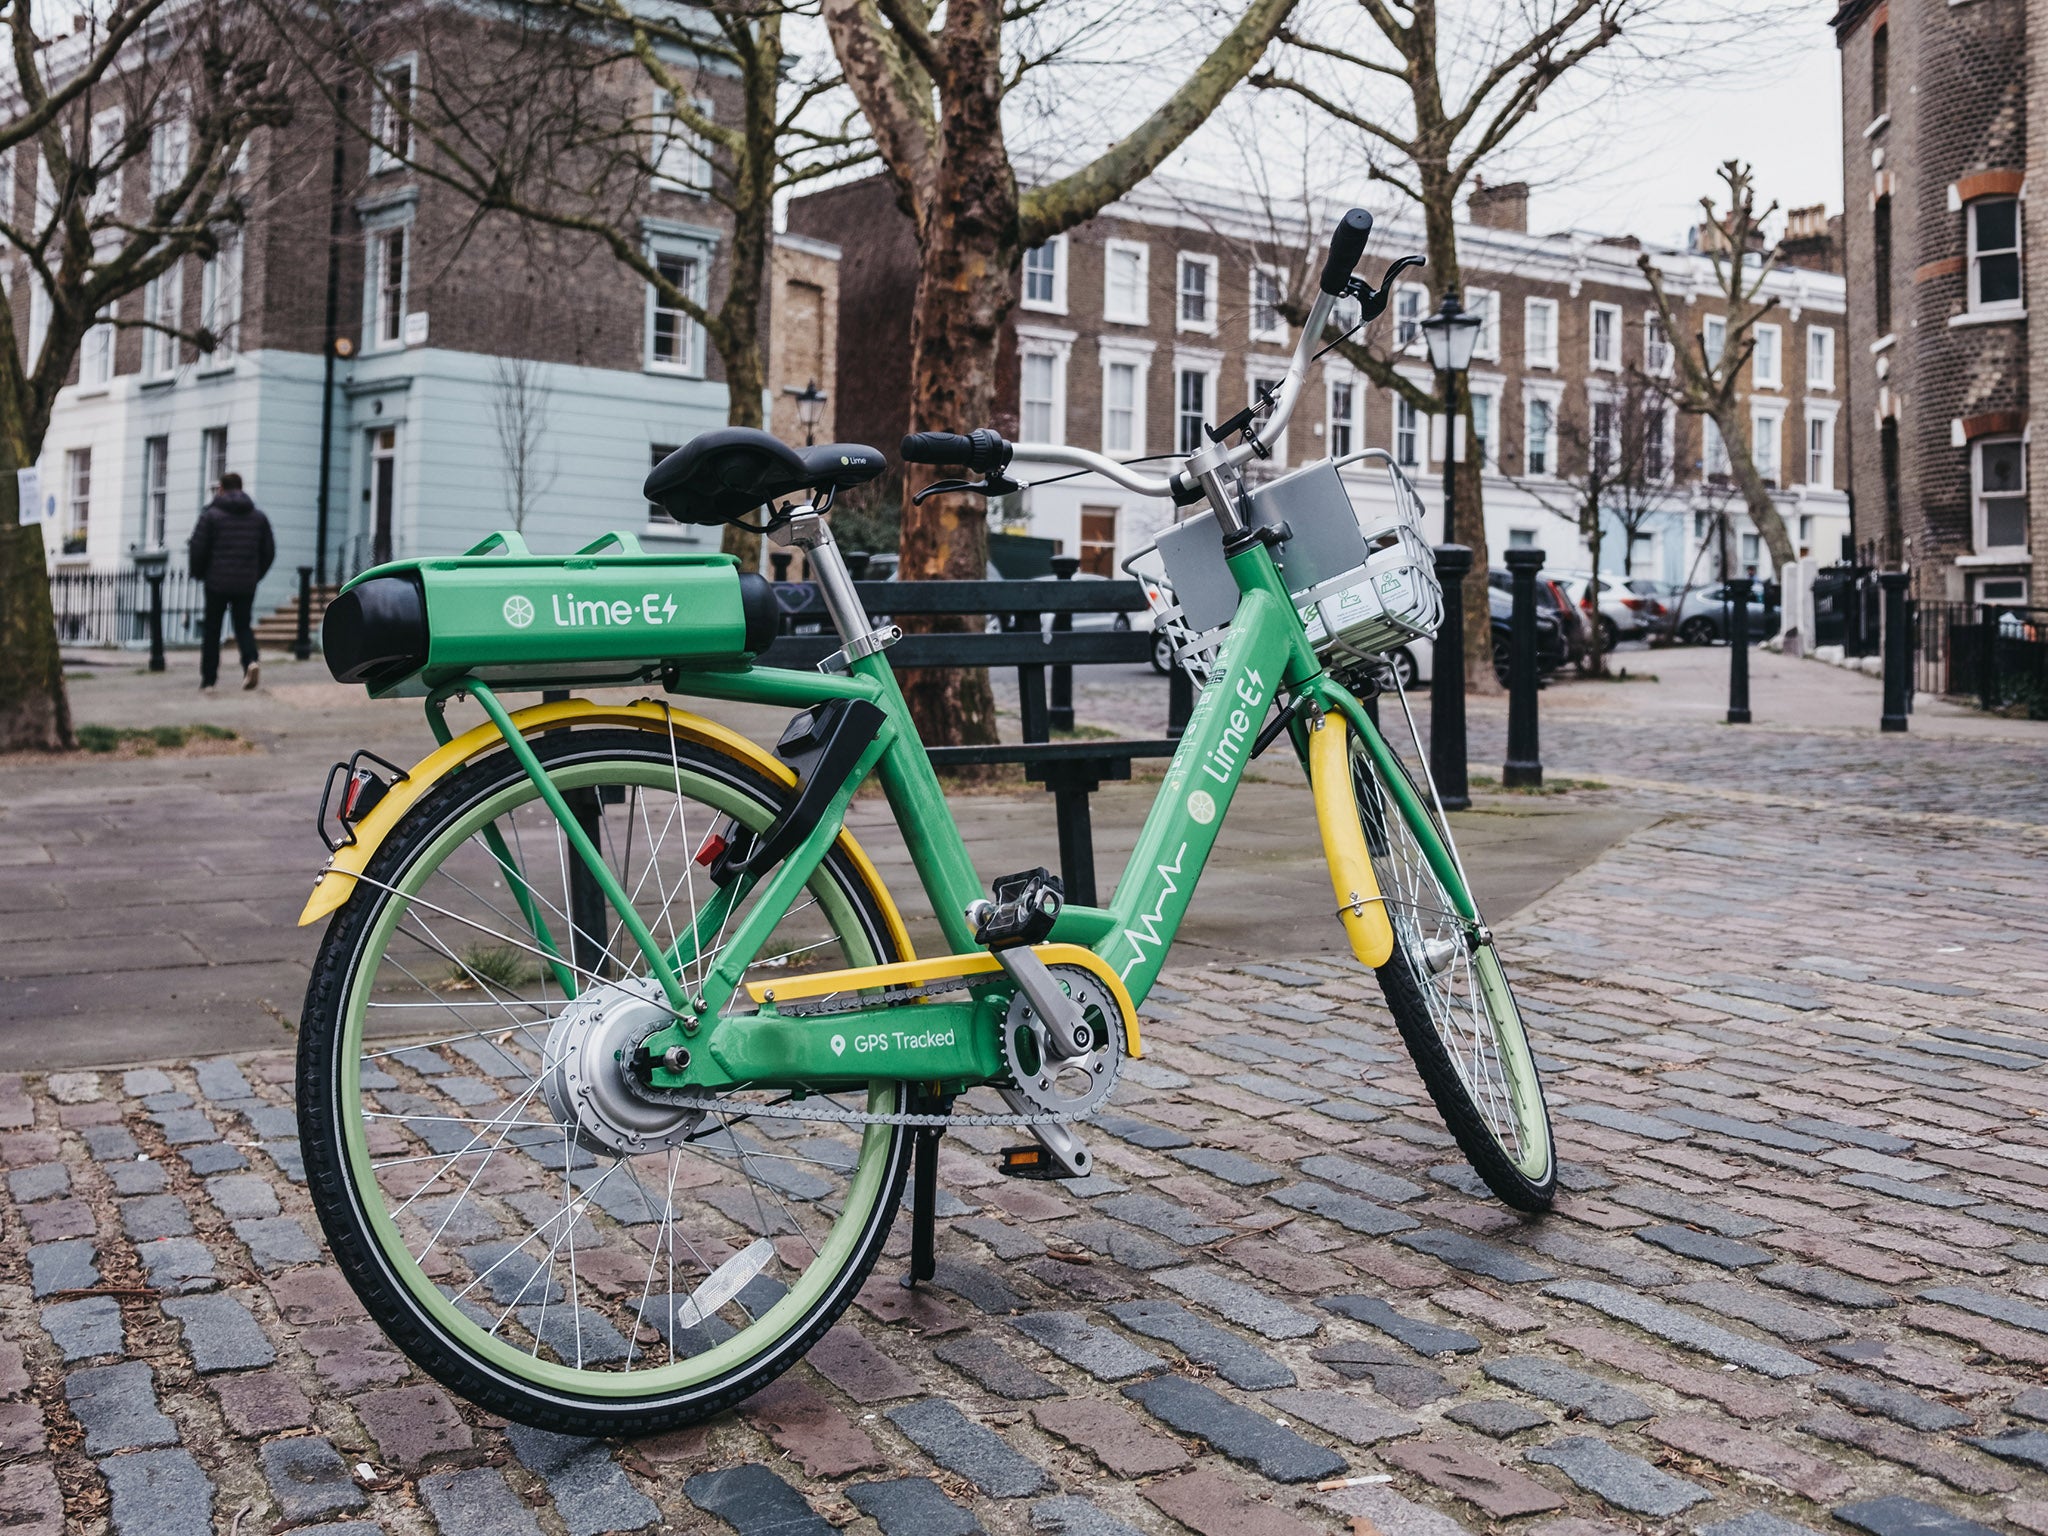 Lime’s brightly coloured fleet of electric-assist bikes parked in the UK in 2018